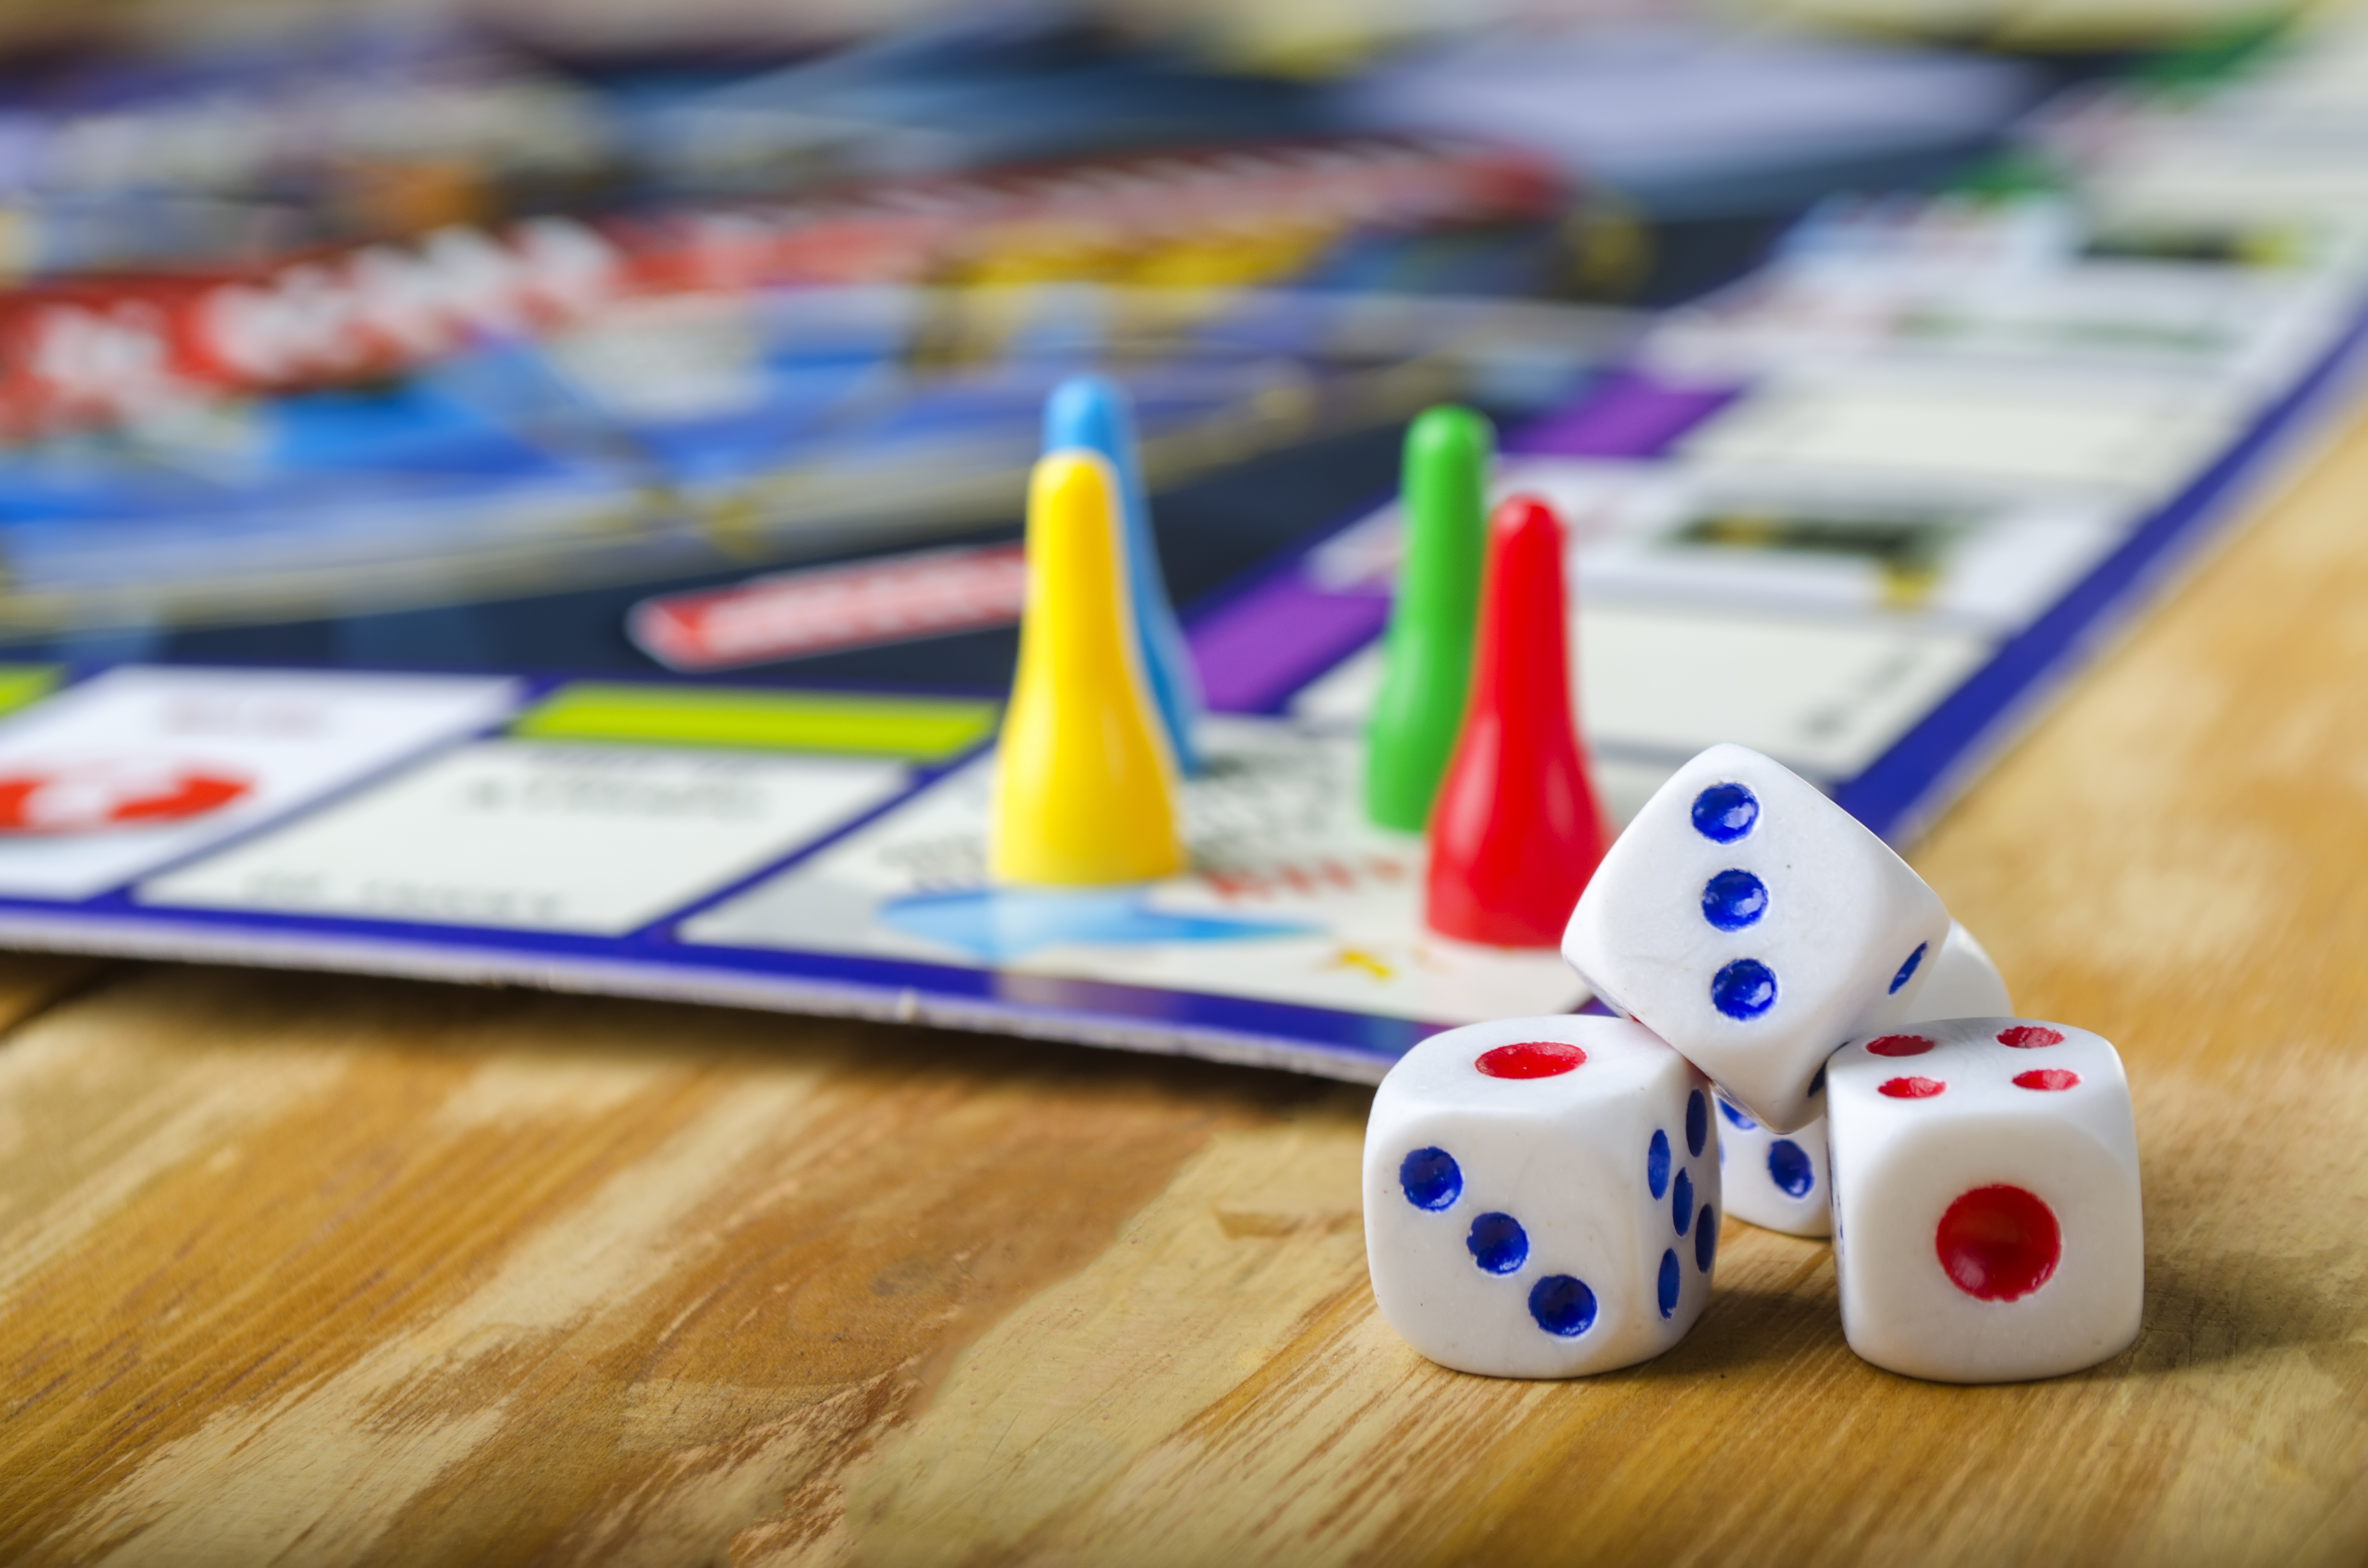 Board game with tokens and dice